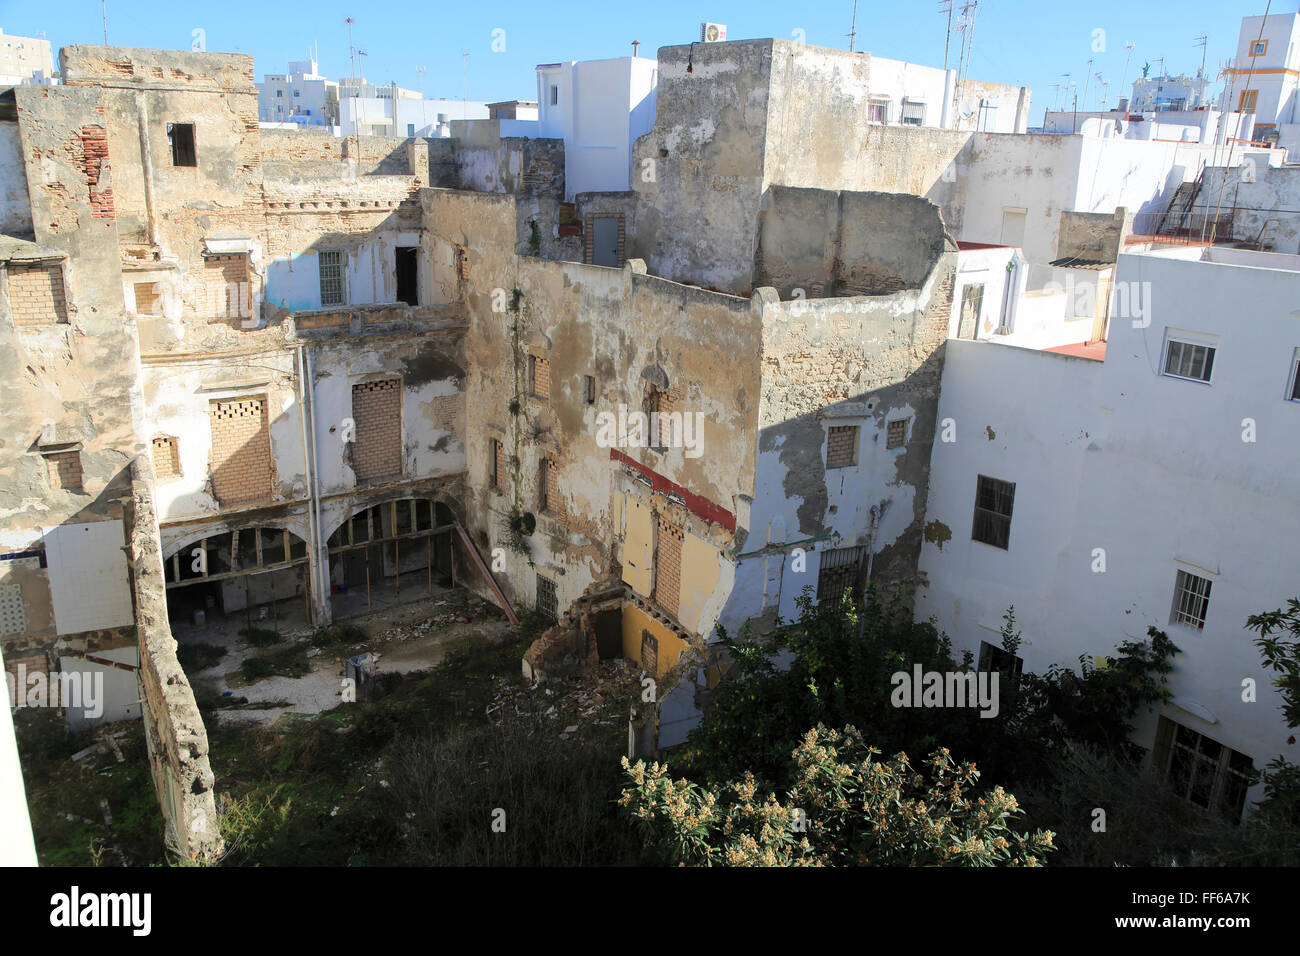 View over city centre internal courtyard with some building dereliction, Cadiz, Spain Stock Photo